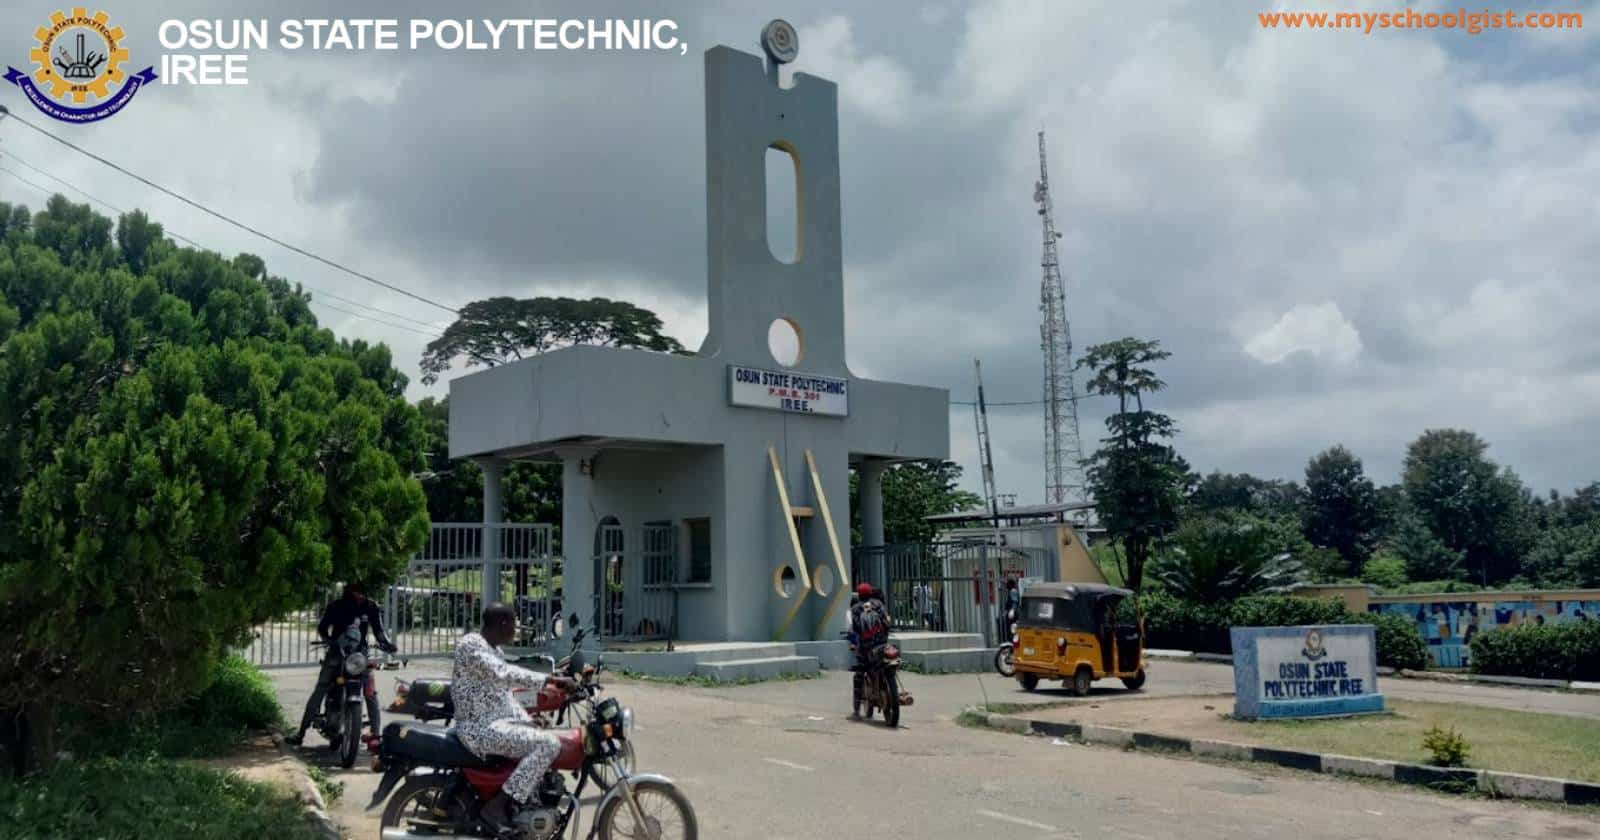 Osun State Polytechnic Iree Part-Time Matriculation Ceremony